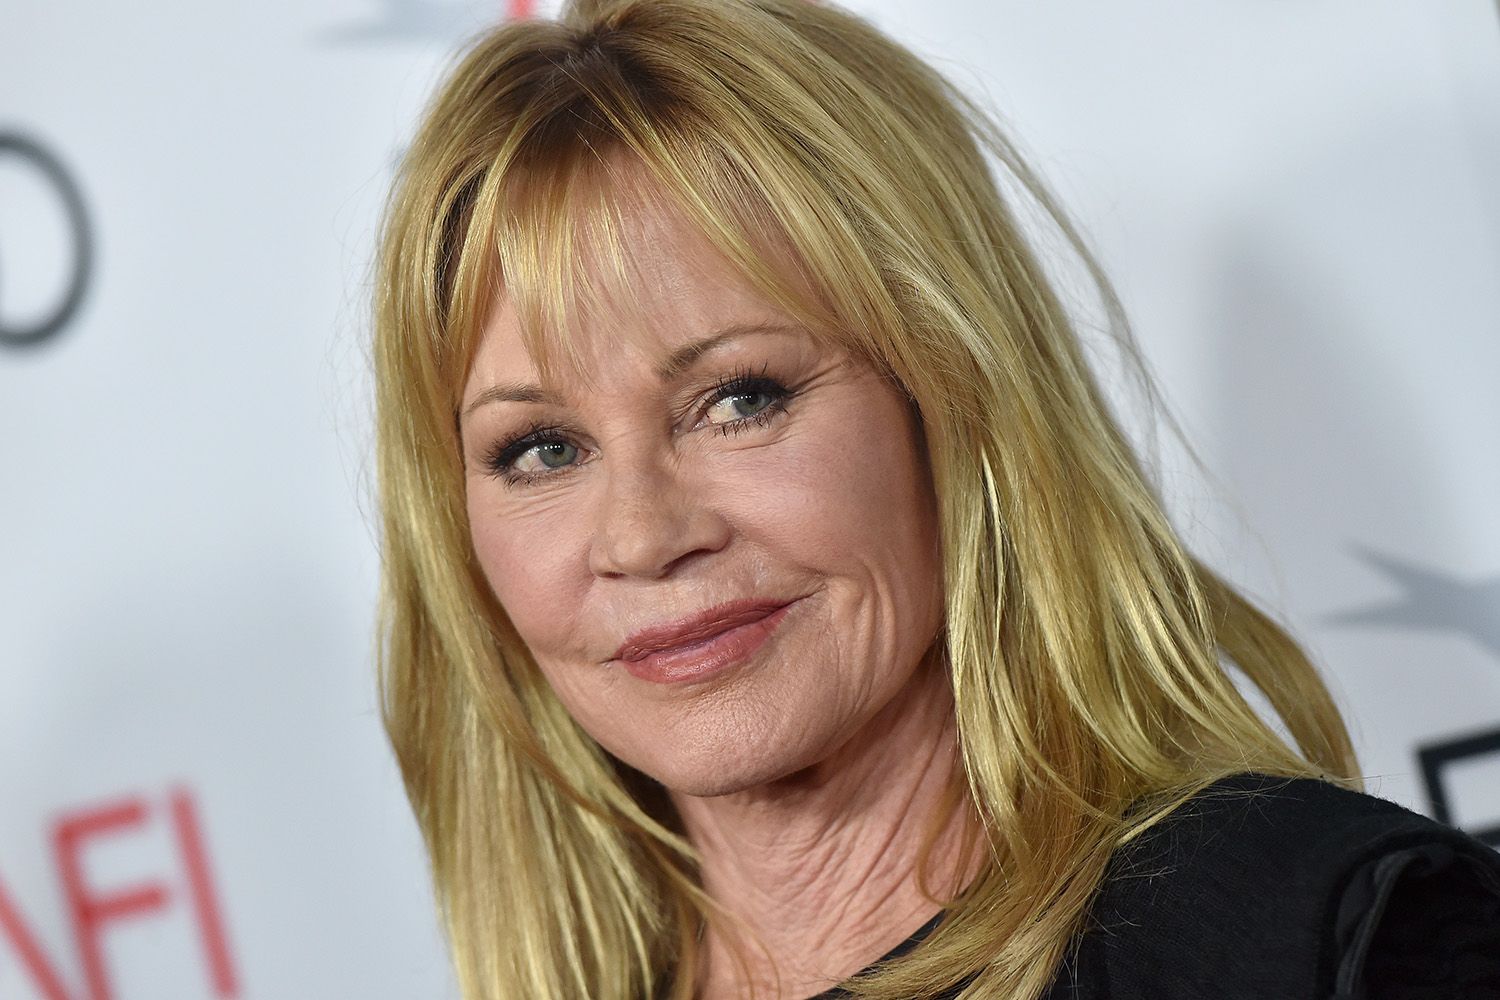 How old is Melanie Griffith net worth?